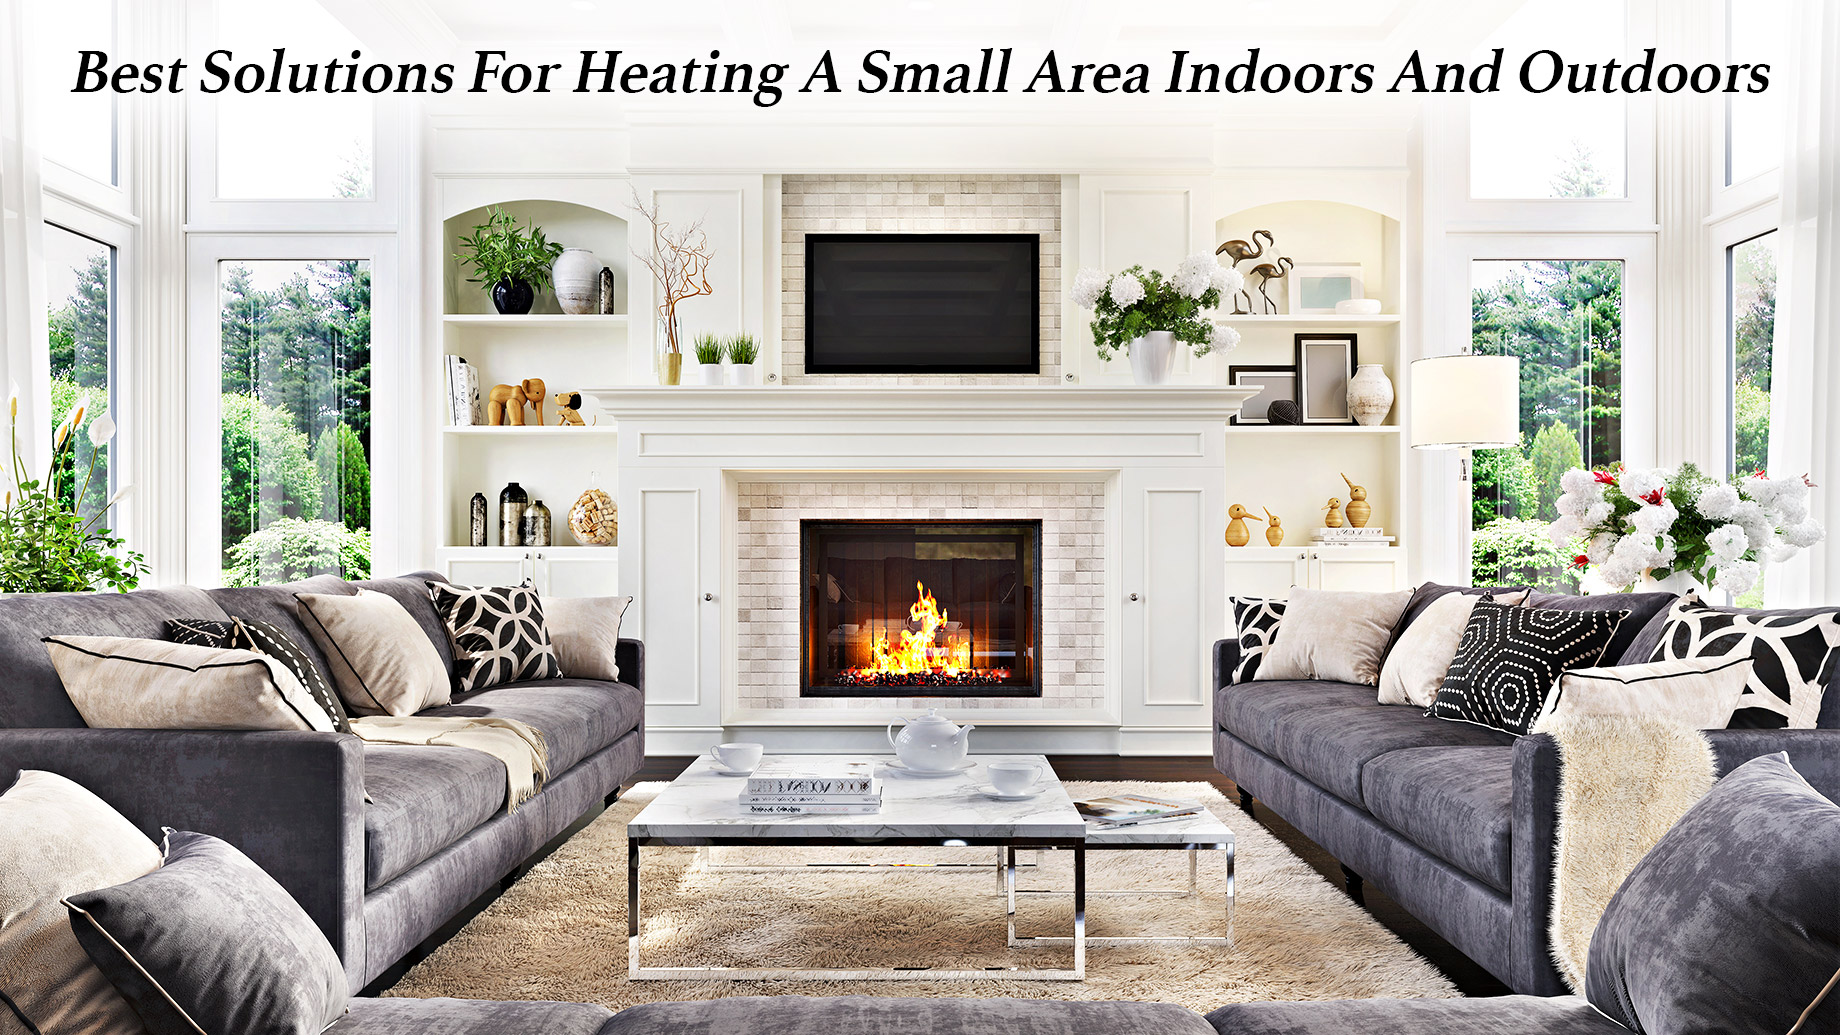 Best Solutions For Heating A Small Area Indoors And Outdoors